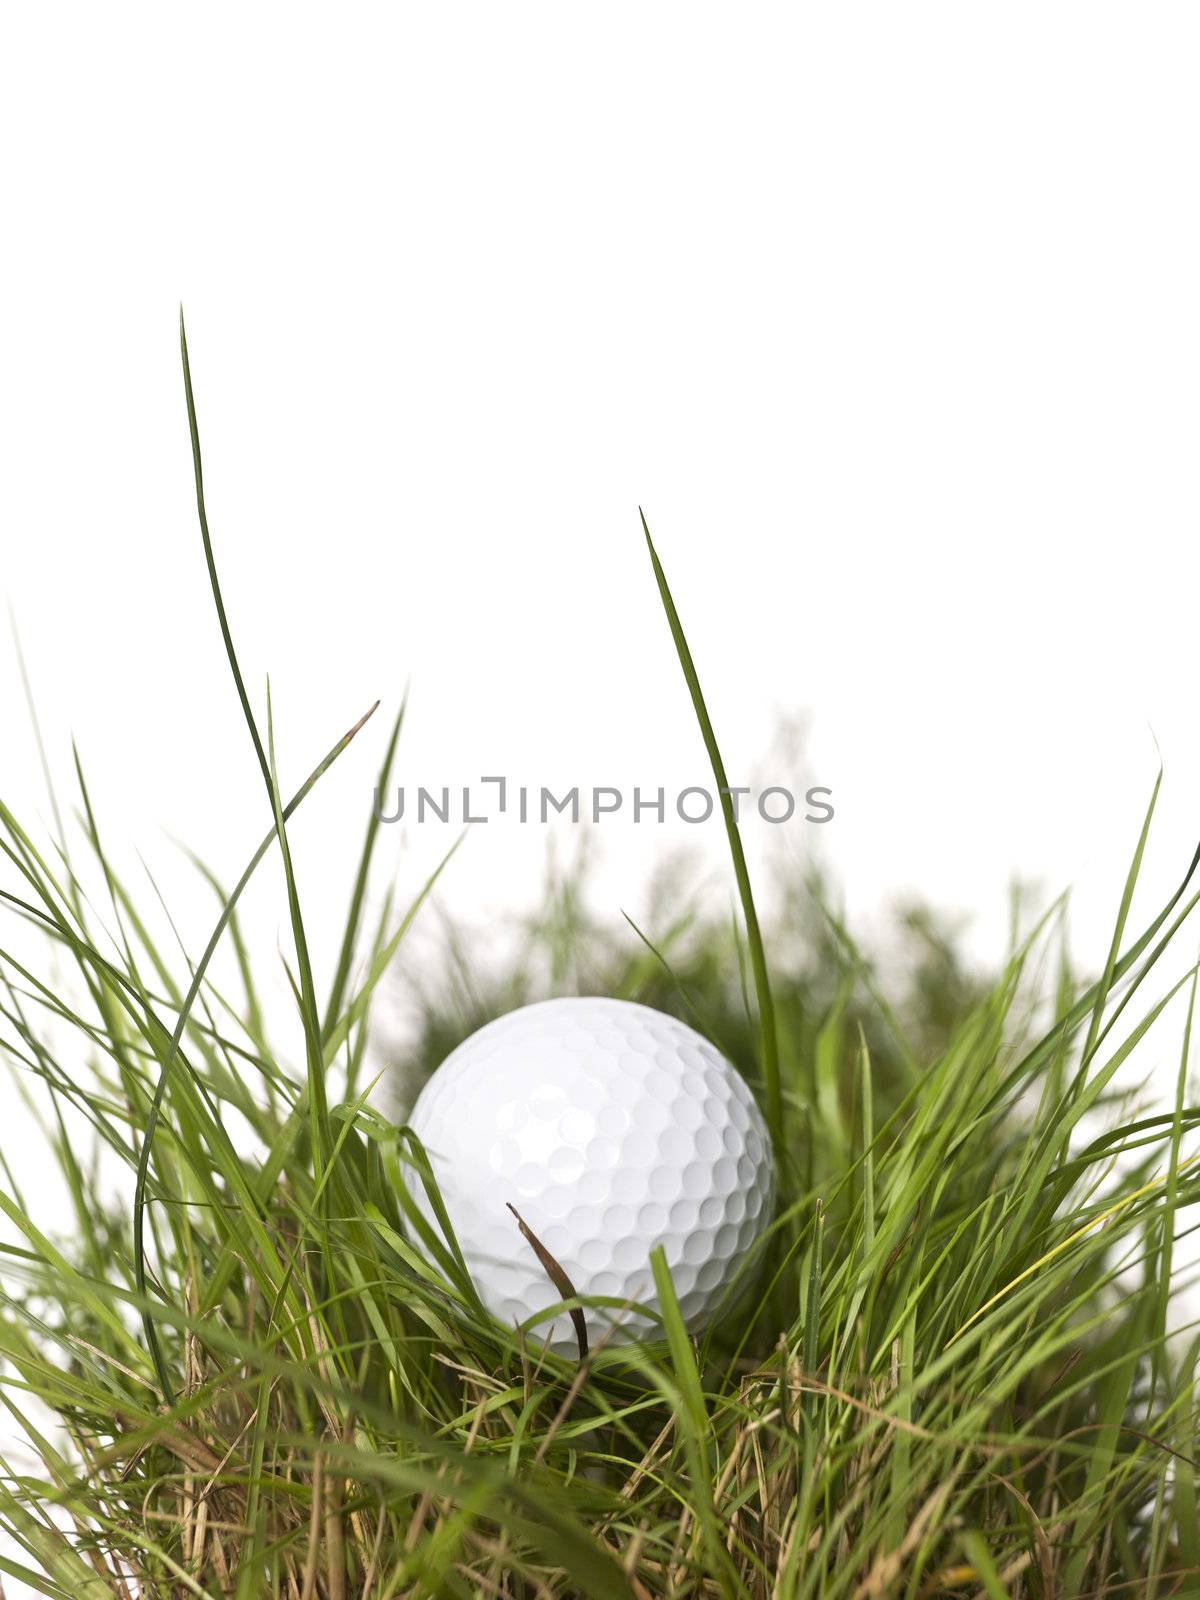 Golf ball on green grass isolated on a white background